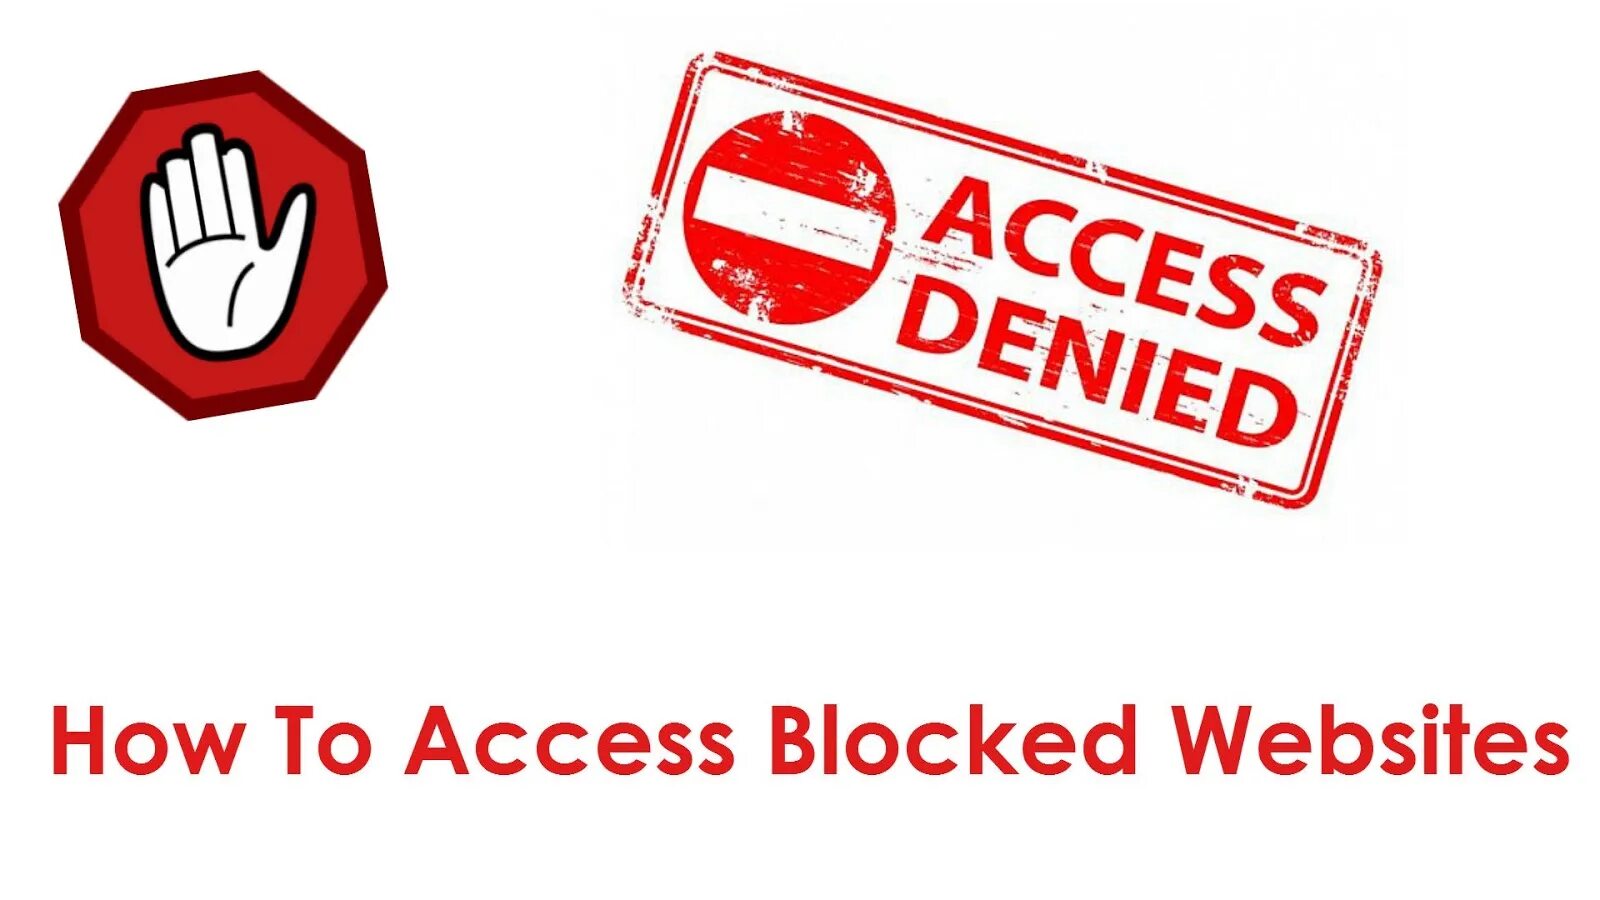 Https youtube com t restricted access 2. Access blocked. Site blocked. Blocked website. Blocked websites access.